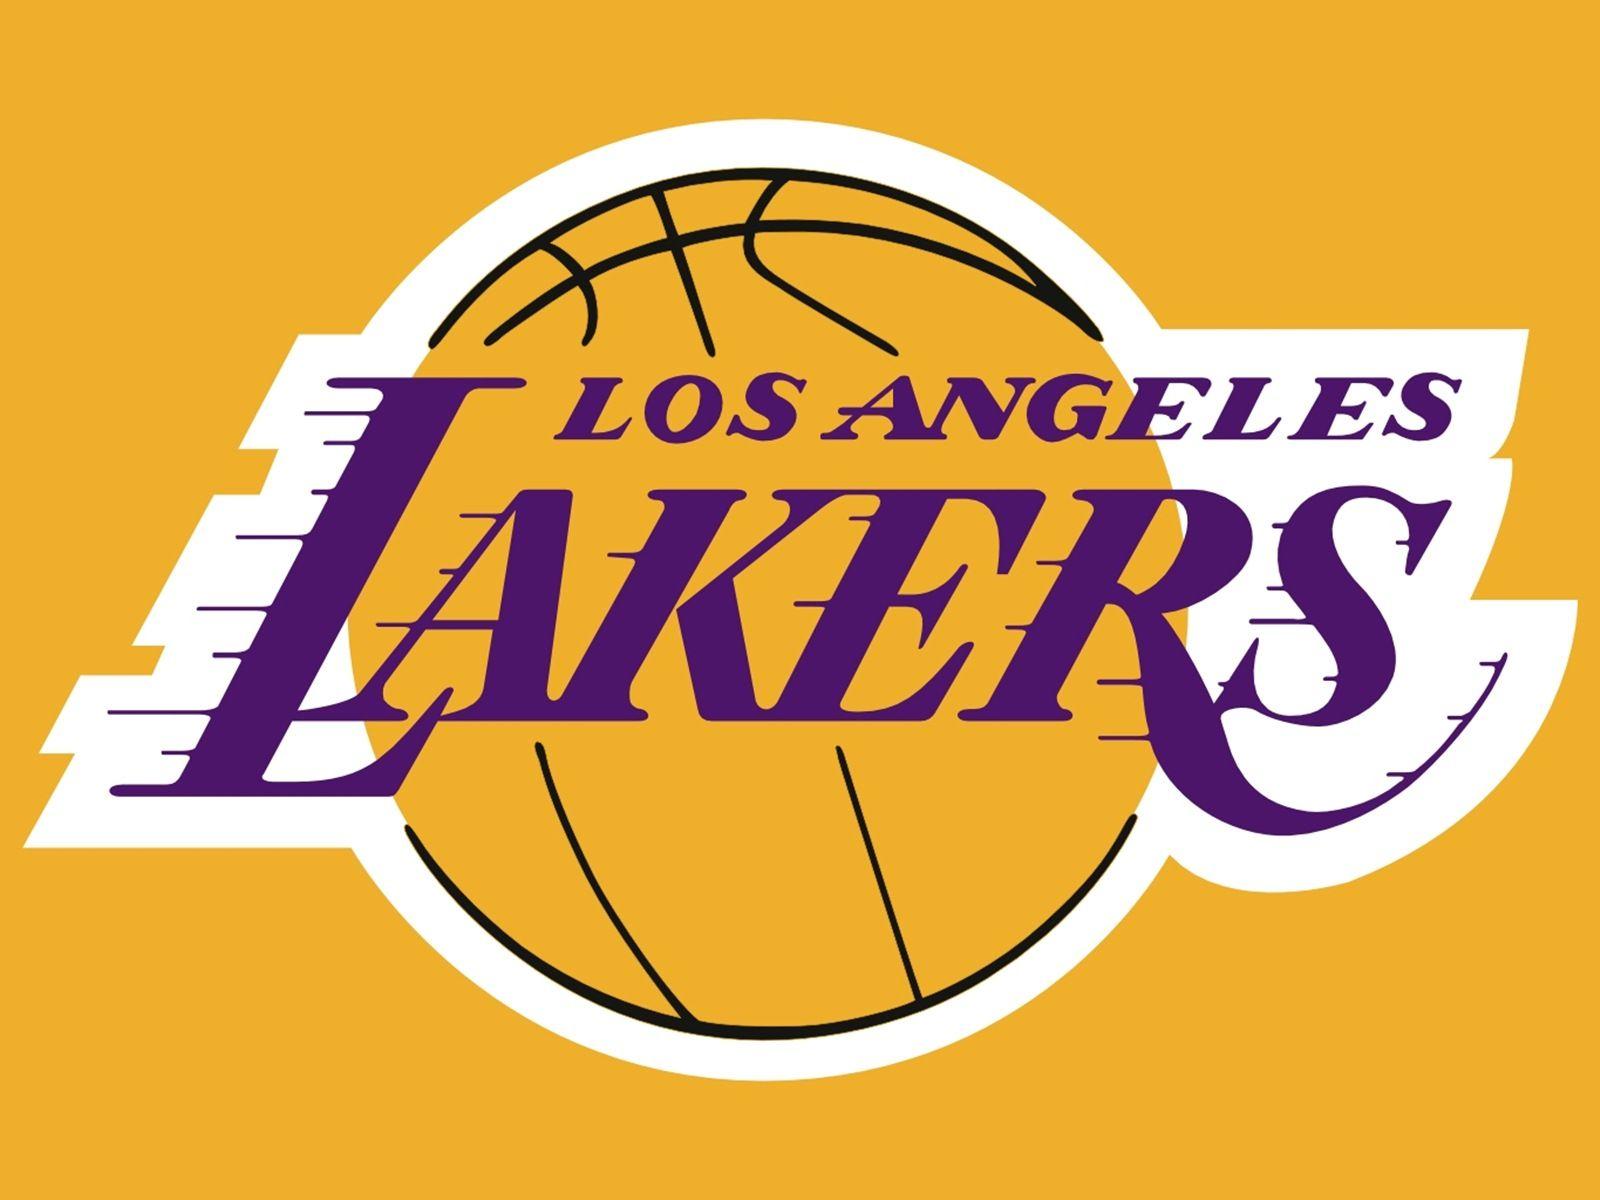 Enjoy this Los Angeles Lakers background